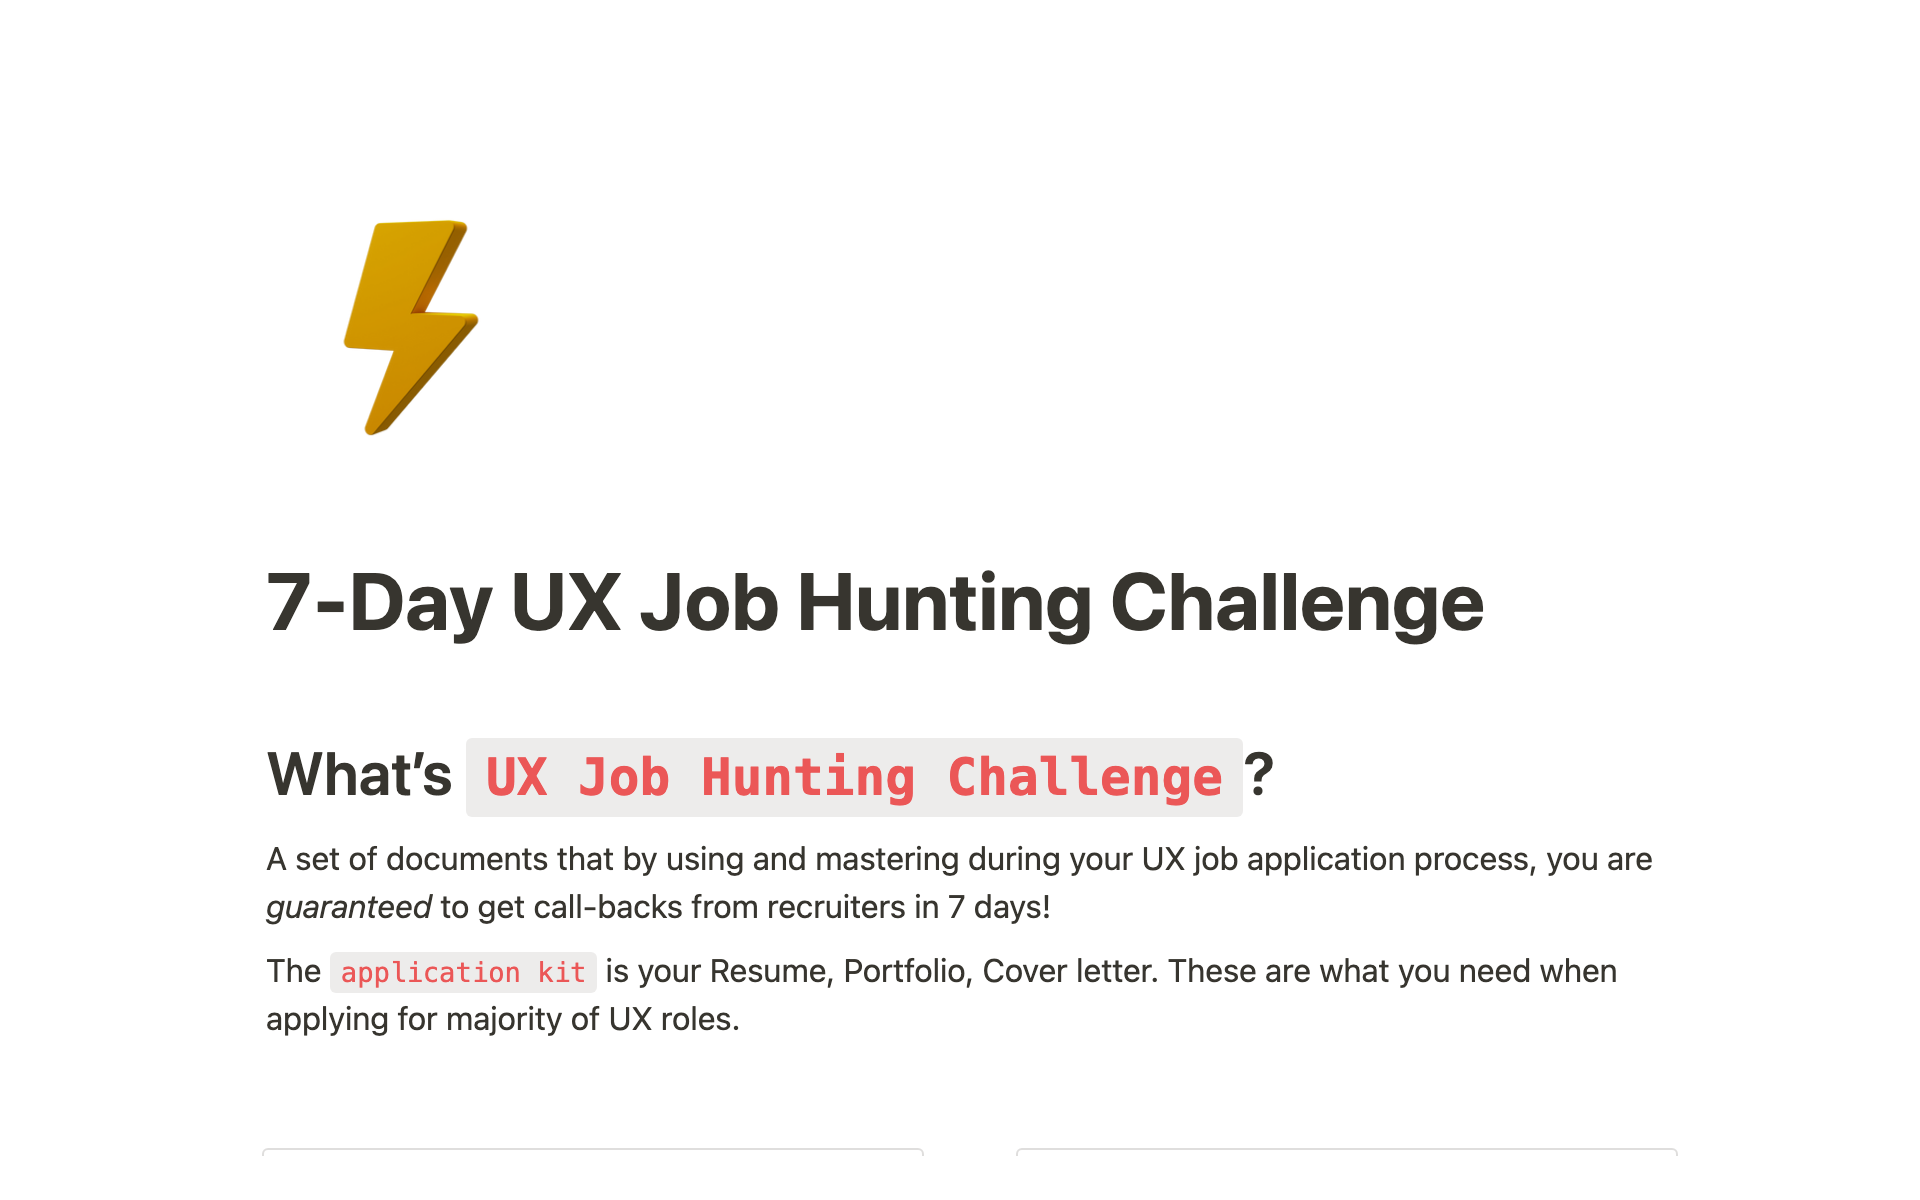 A guide to go from 0 to 10 UX job applications in 7 days.